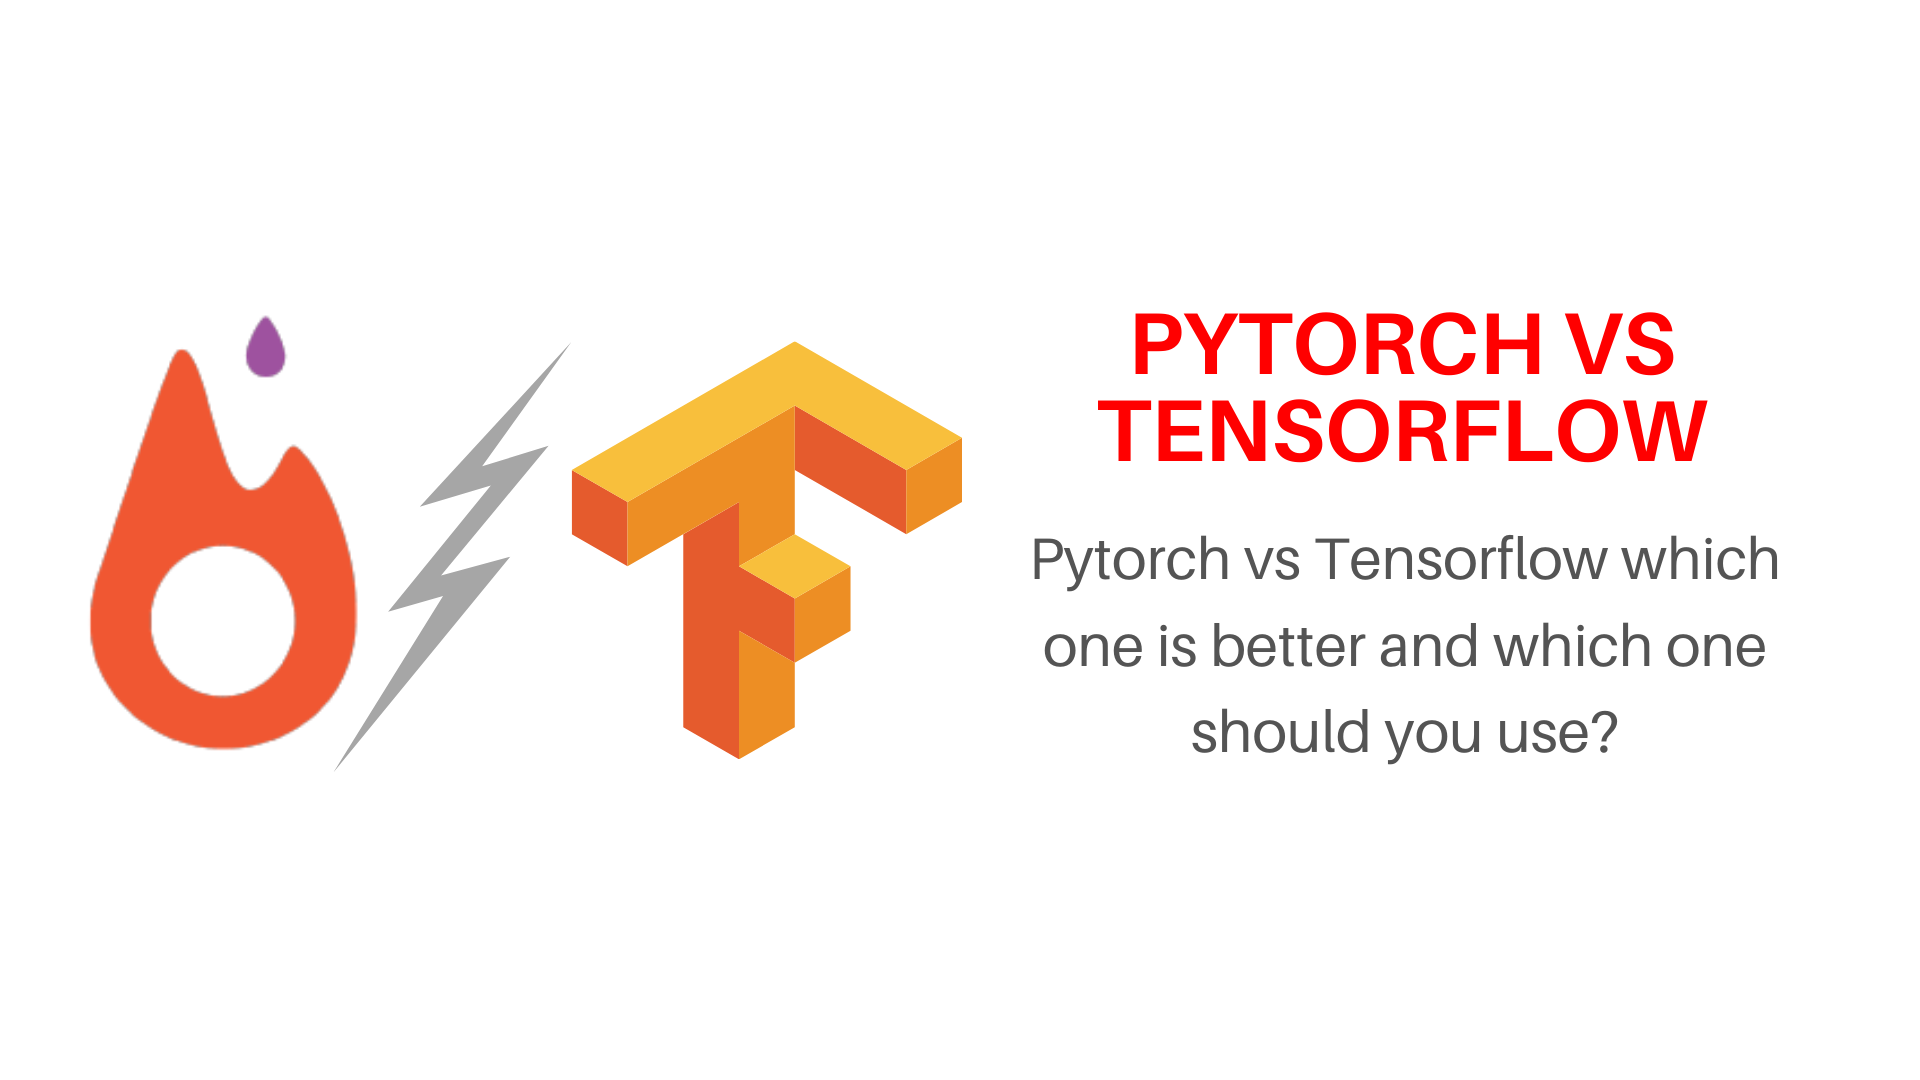 Pytorch vs Tensorflow which is better